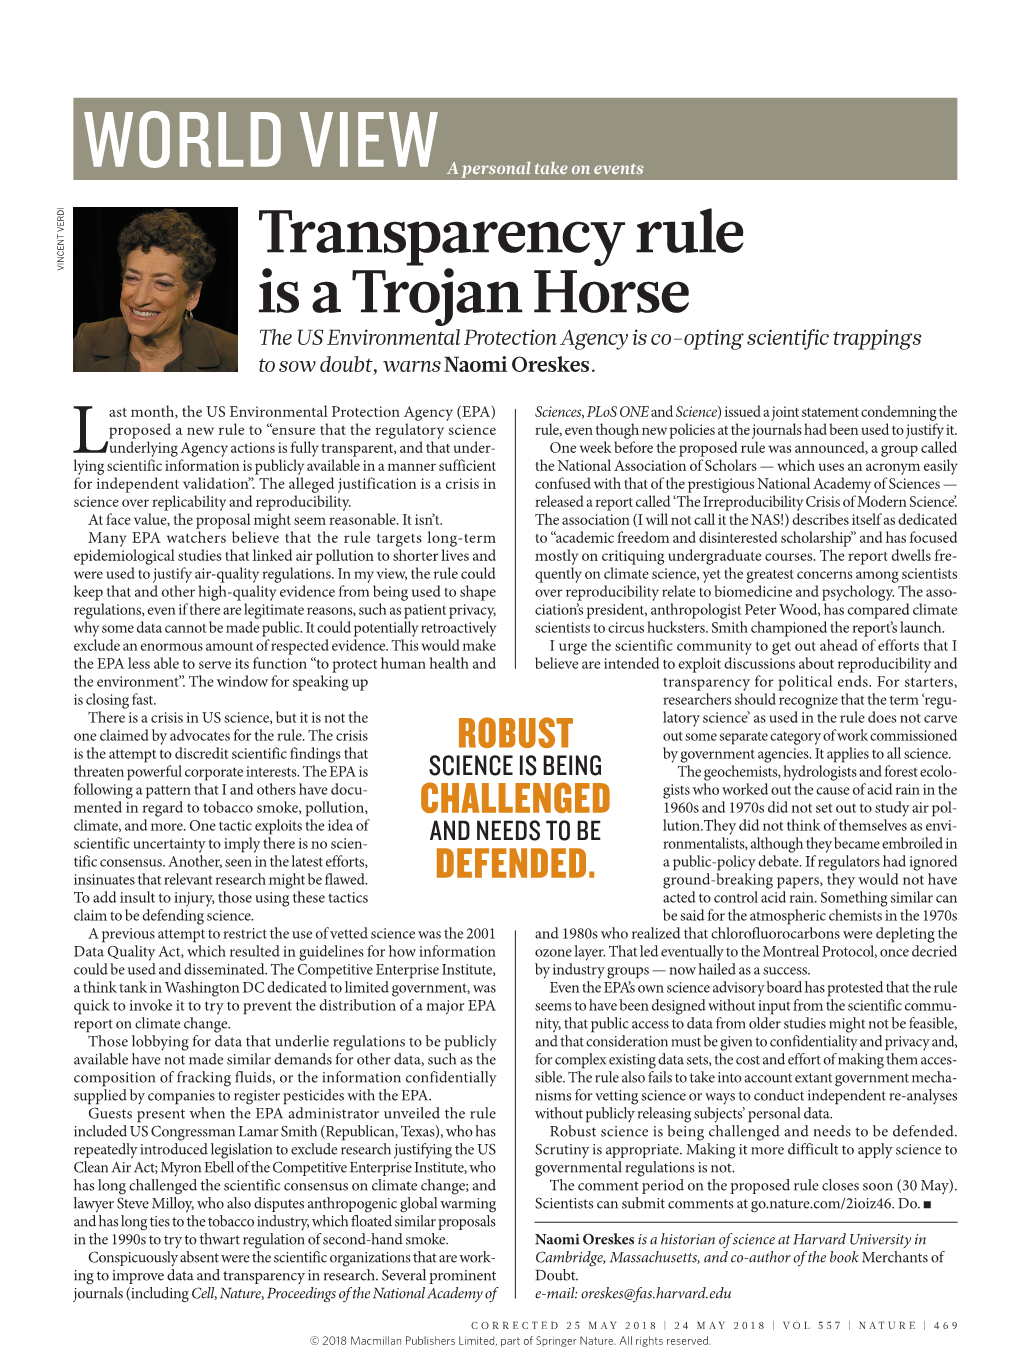 Transparency Rule Is a Trojan Horse the US Environmental Protection Agency Is Co-Opting Scientific Trappings to Sow Doubt, Warns Naomi Oreskes